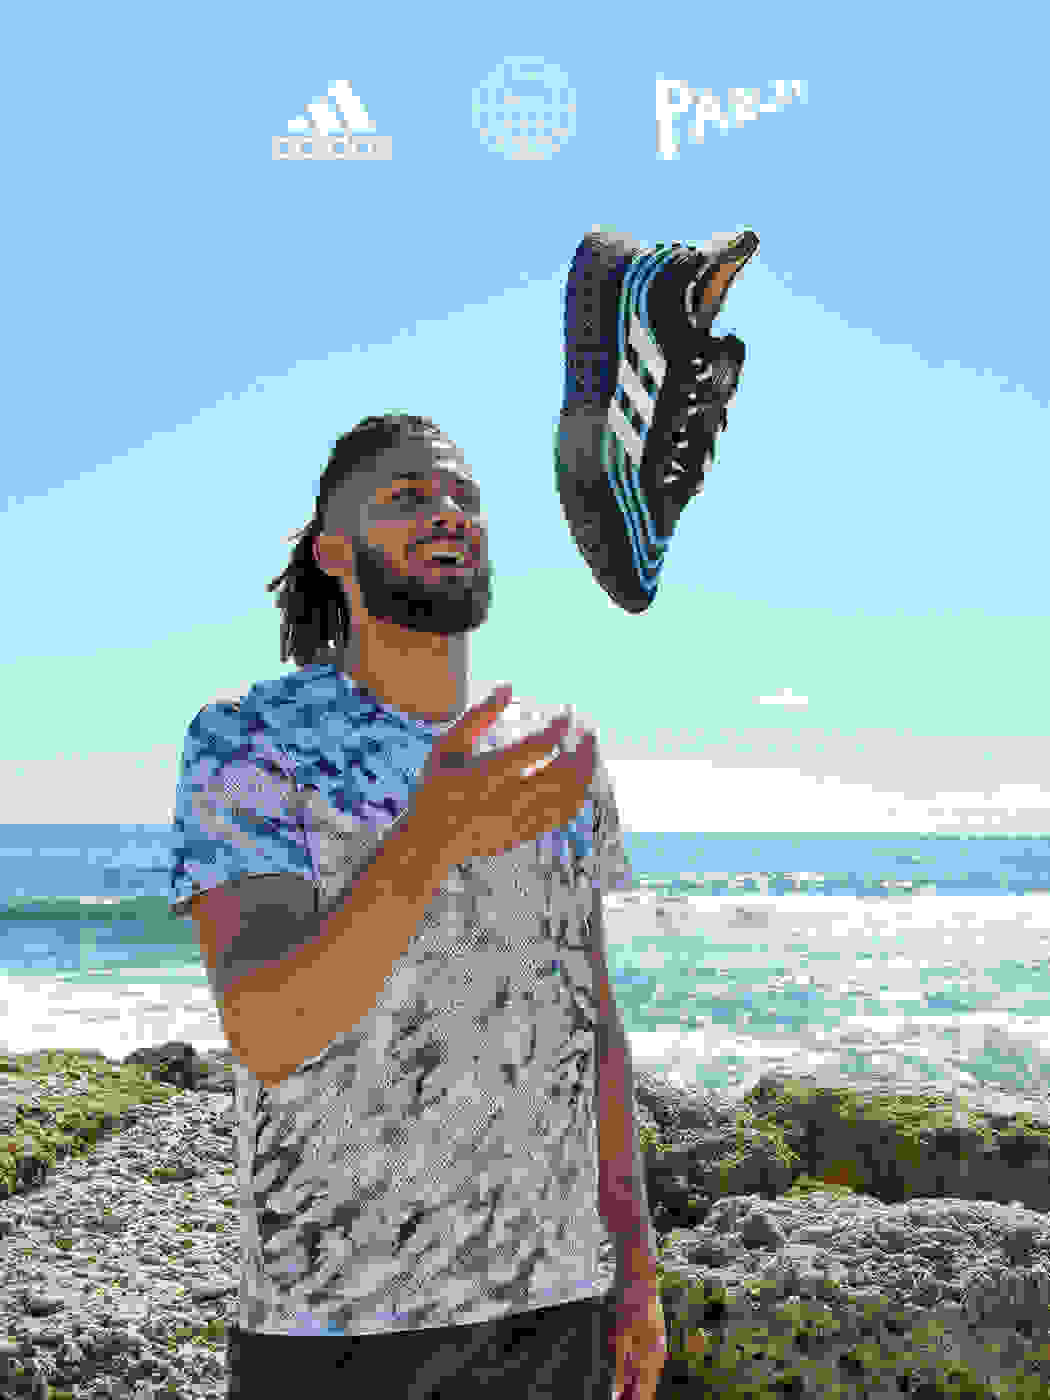 Fernando Tatís Jr. (Dominican, professional baseball player) holding a Parley shoe, with view of beach in the background.